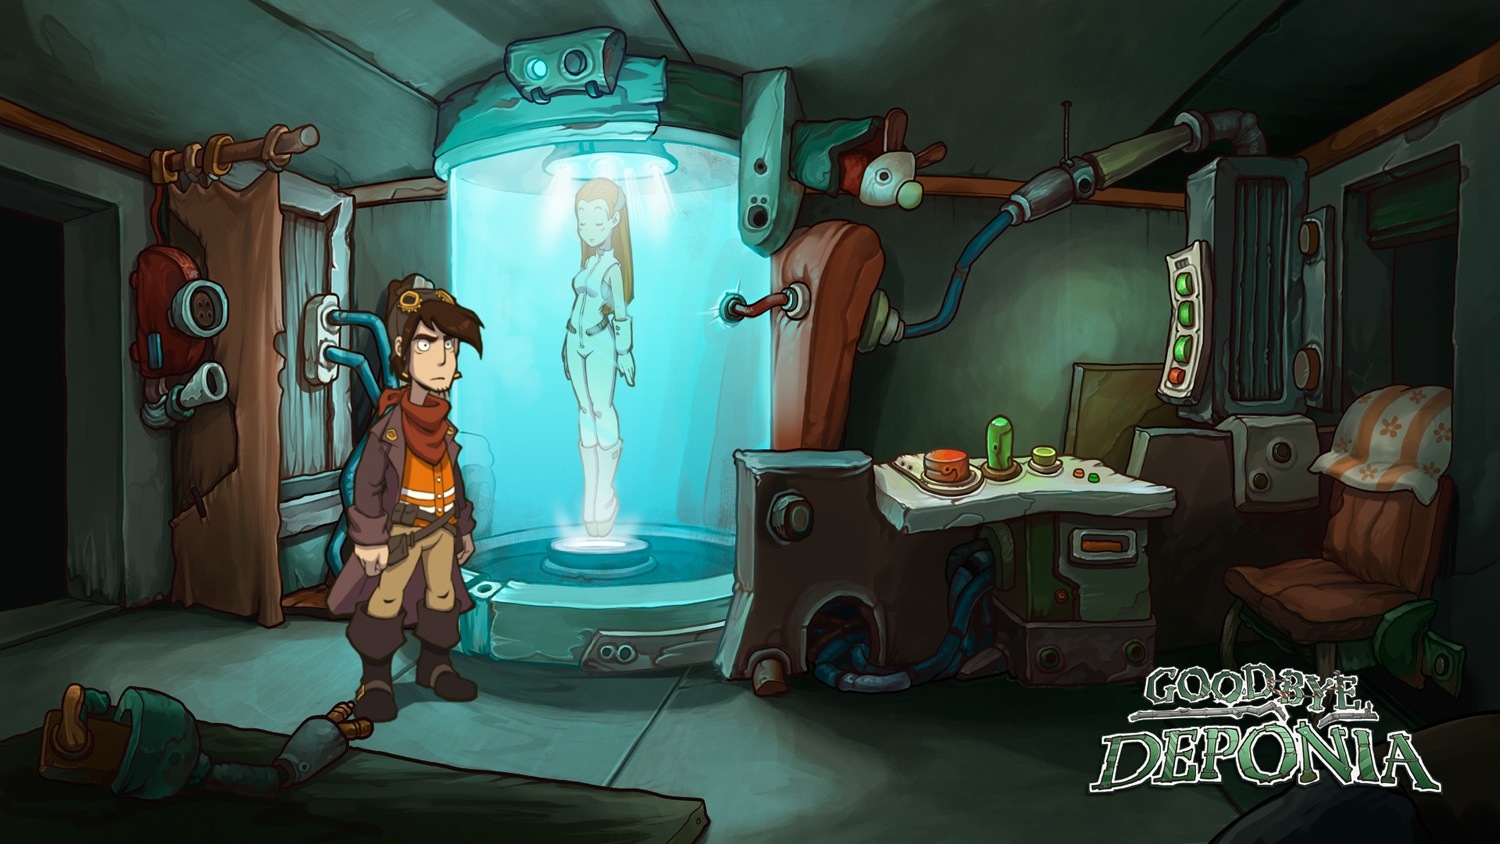 E3 2013: Fixing What’s Broken with Goodbye Deponia